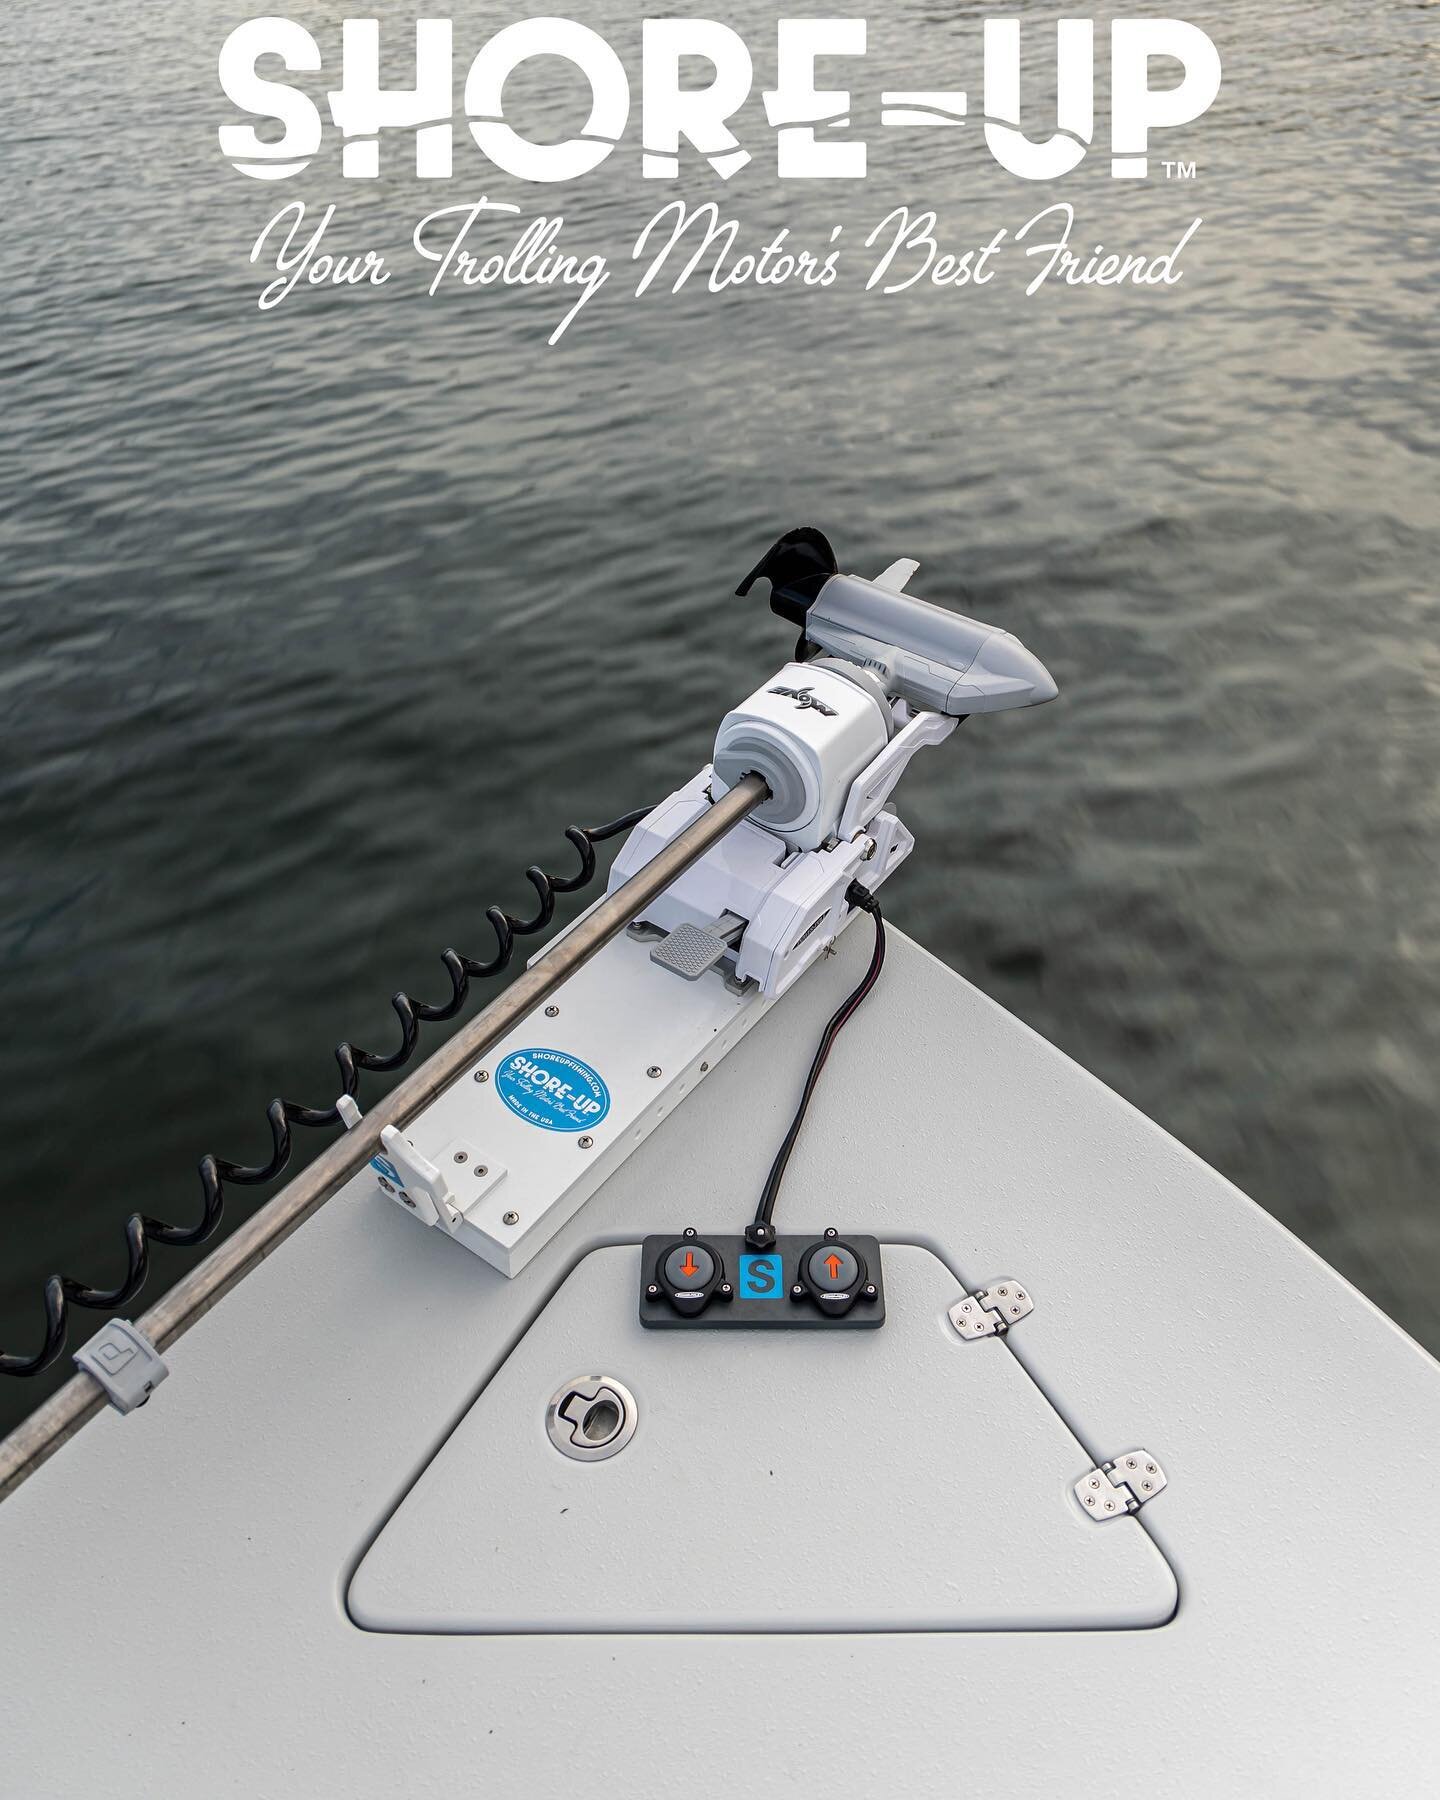 The Shore-Up Trolling Motor Mount solves many of the problems with the current mounts on the market! Learn more at shoreupfishing.com!⠀
⠀
⠀
⠀
⠀
⠀
#shoreup #fishing #trollingmotor #shoreupsystems